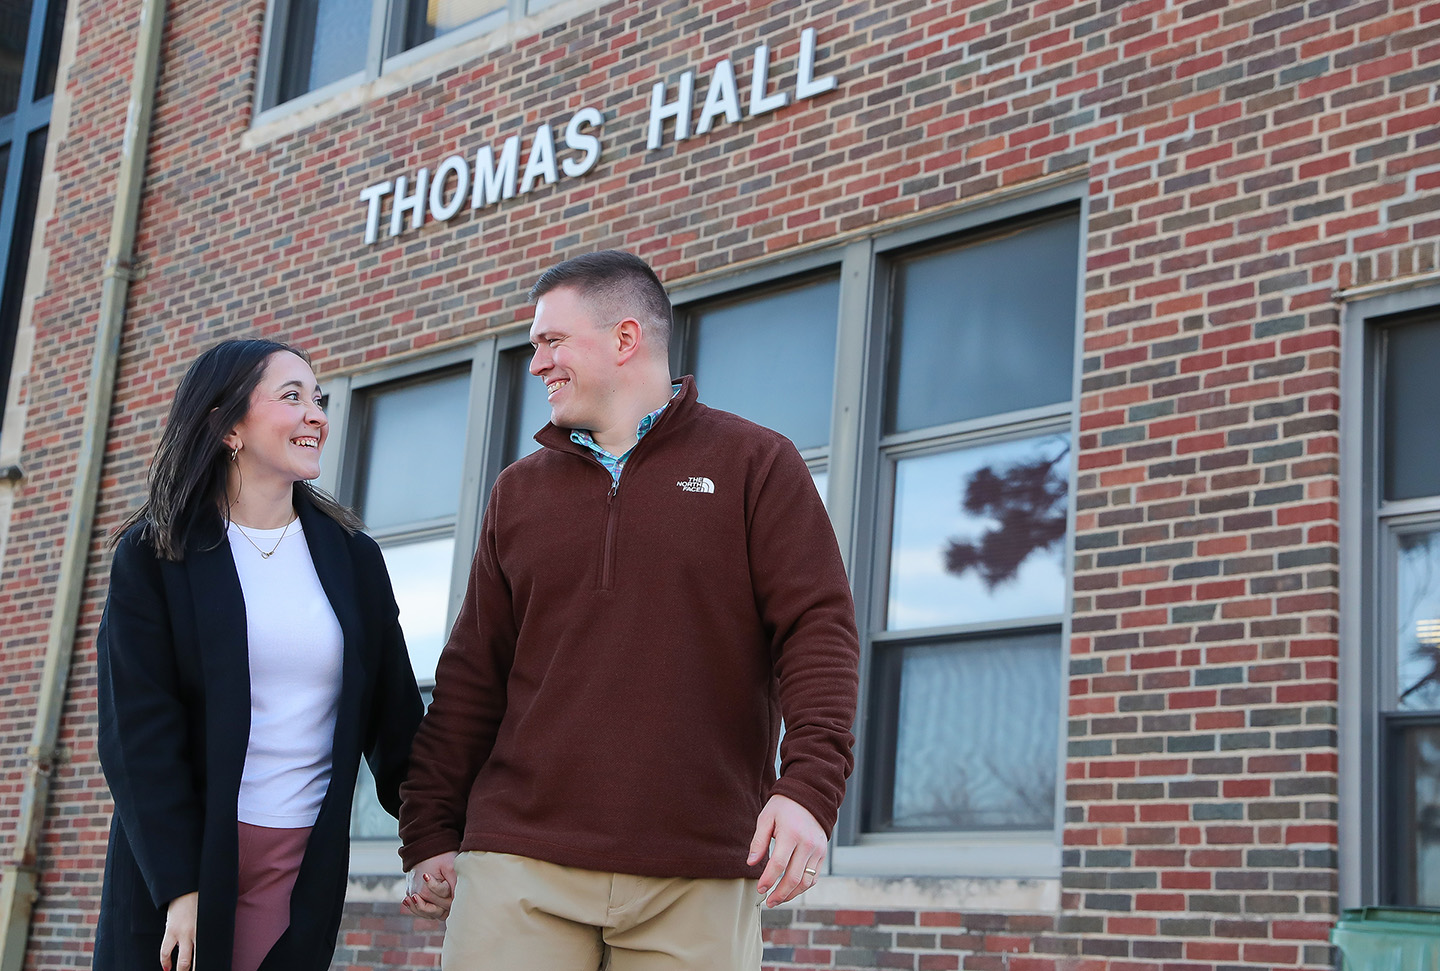 Jeslynn and Hunter Love met during an English 101 class at Thomas Hall when they were both freshmen at UNK. They’ve been together ever since.